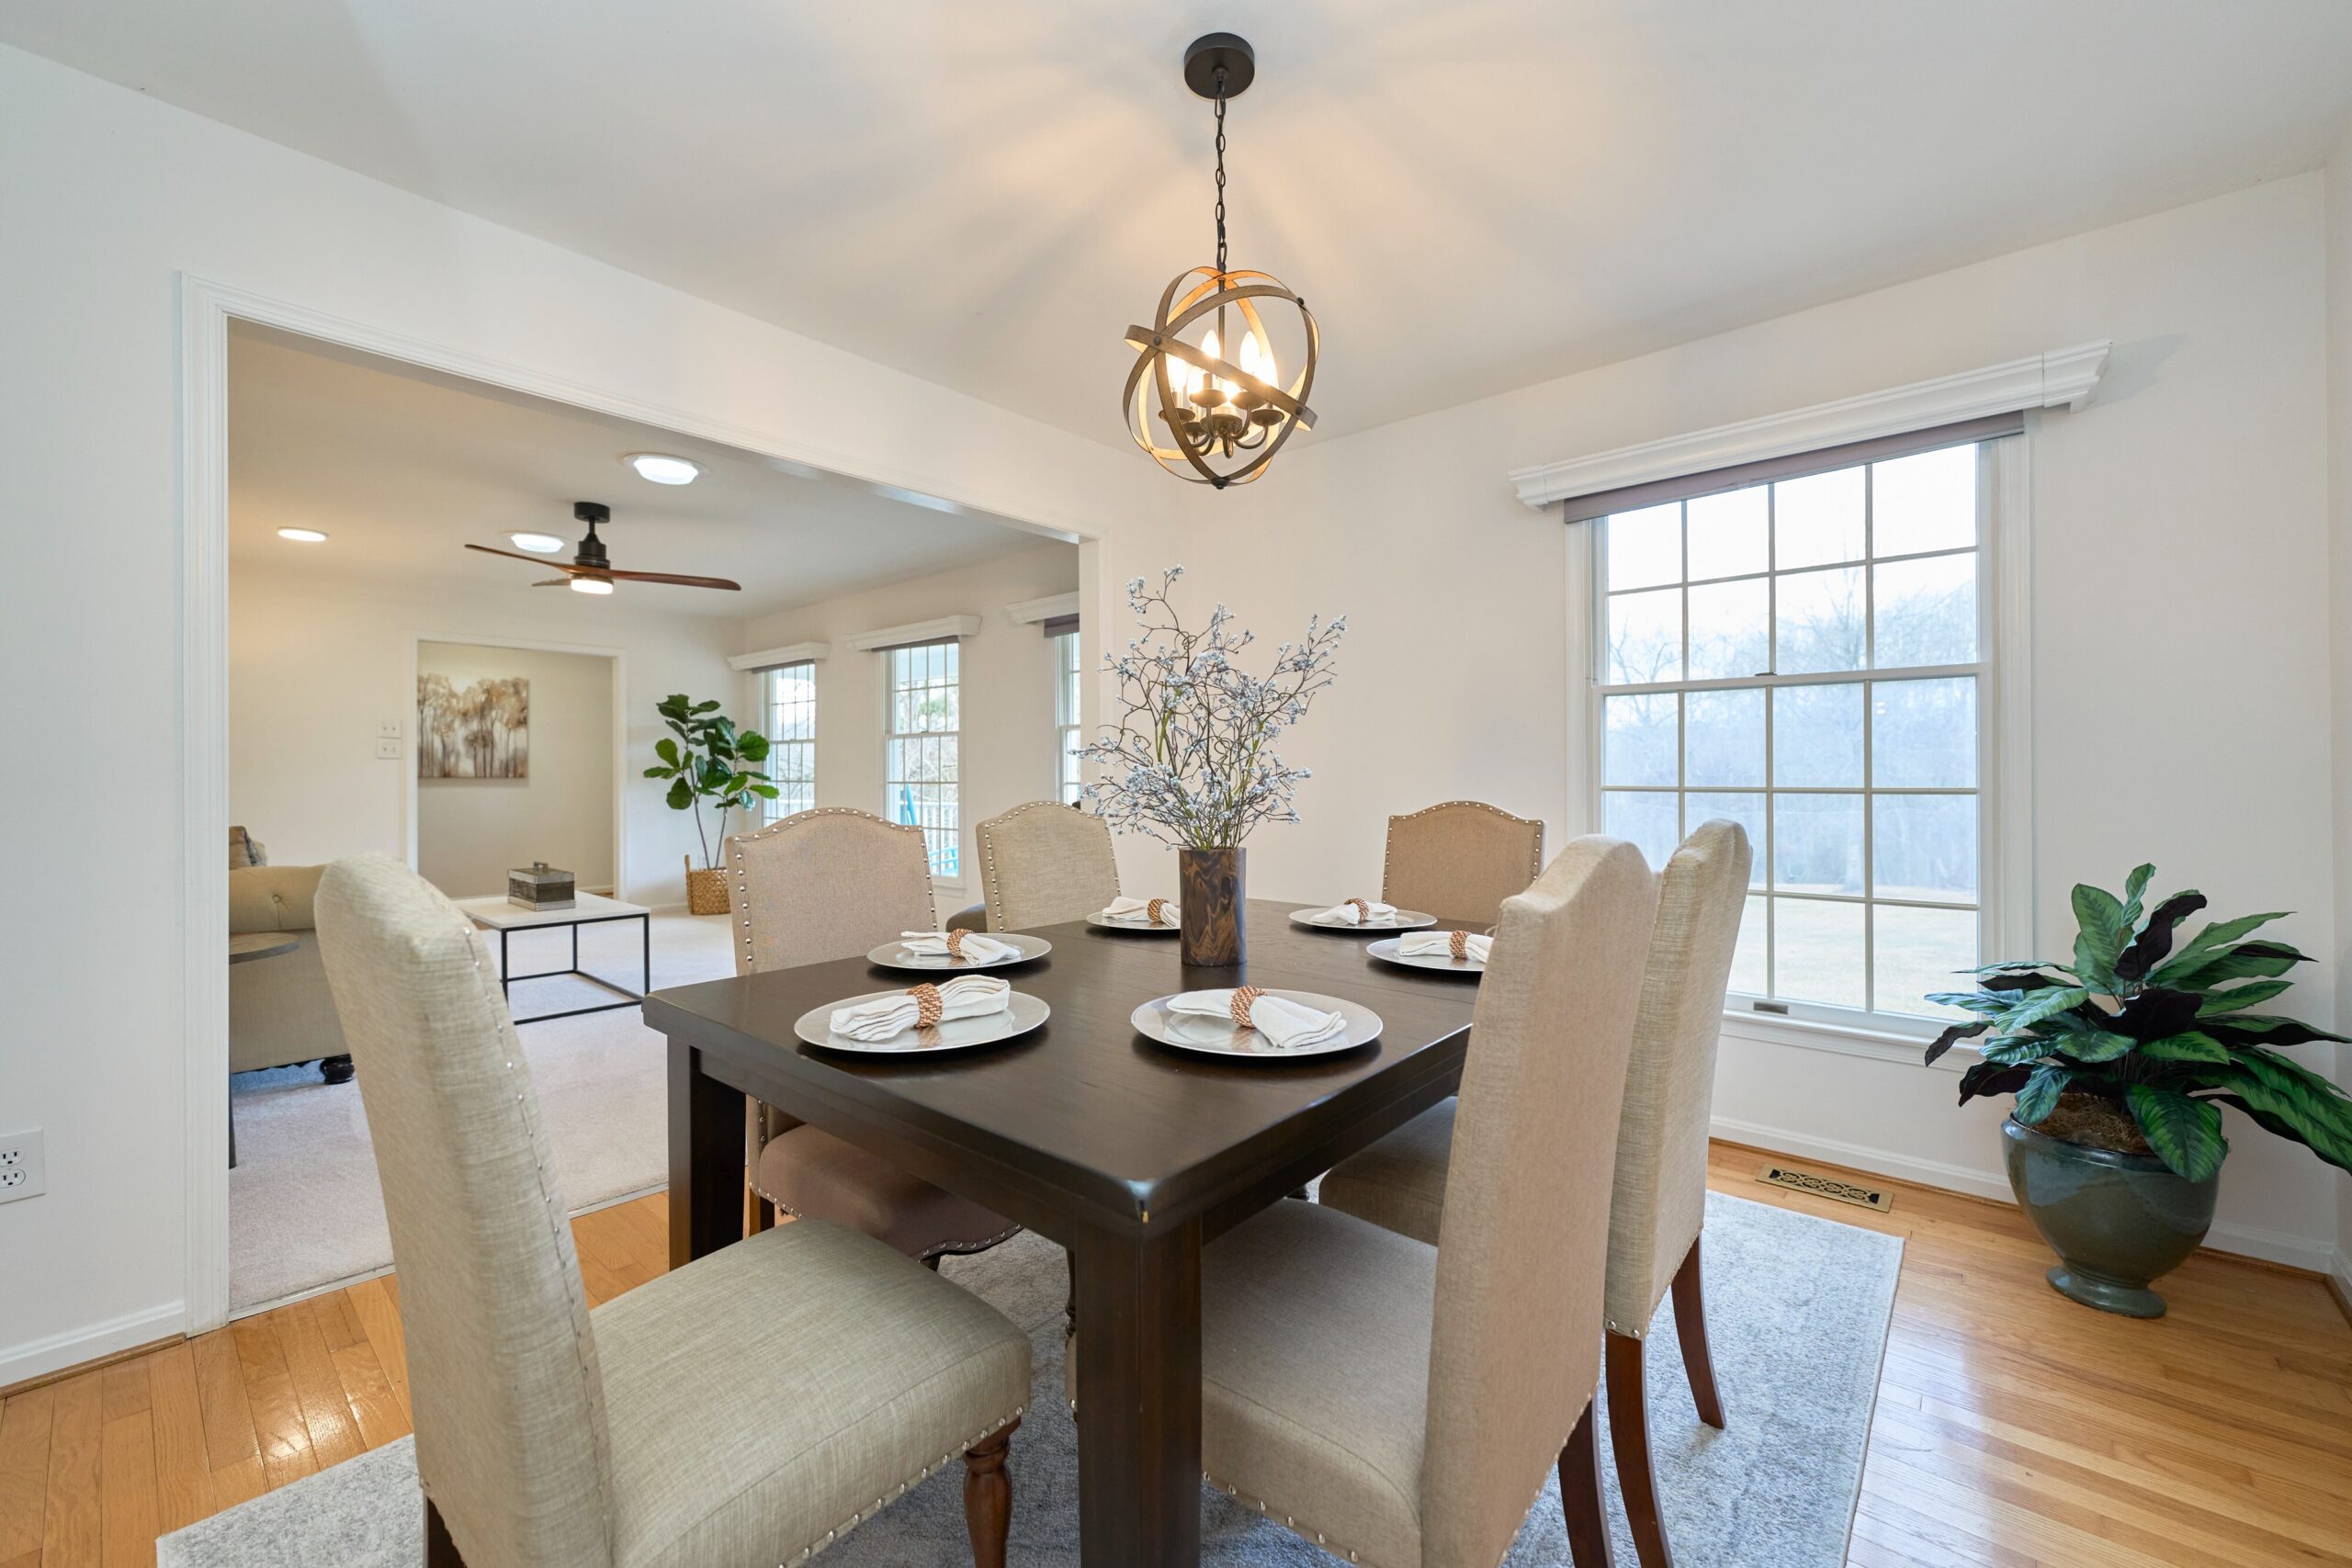 Professional interior photo of 3103 Indian Run Rd - showing the dining room with modern light fixture, hardwood floors and front sitting room in the background